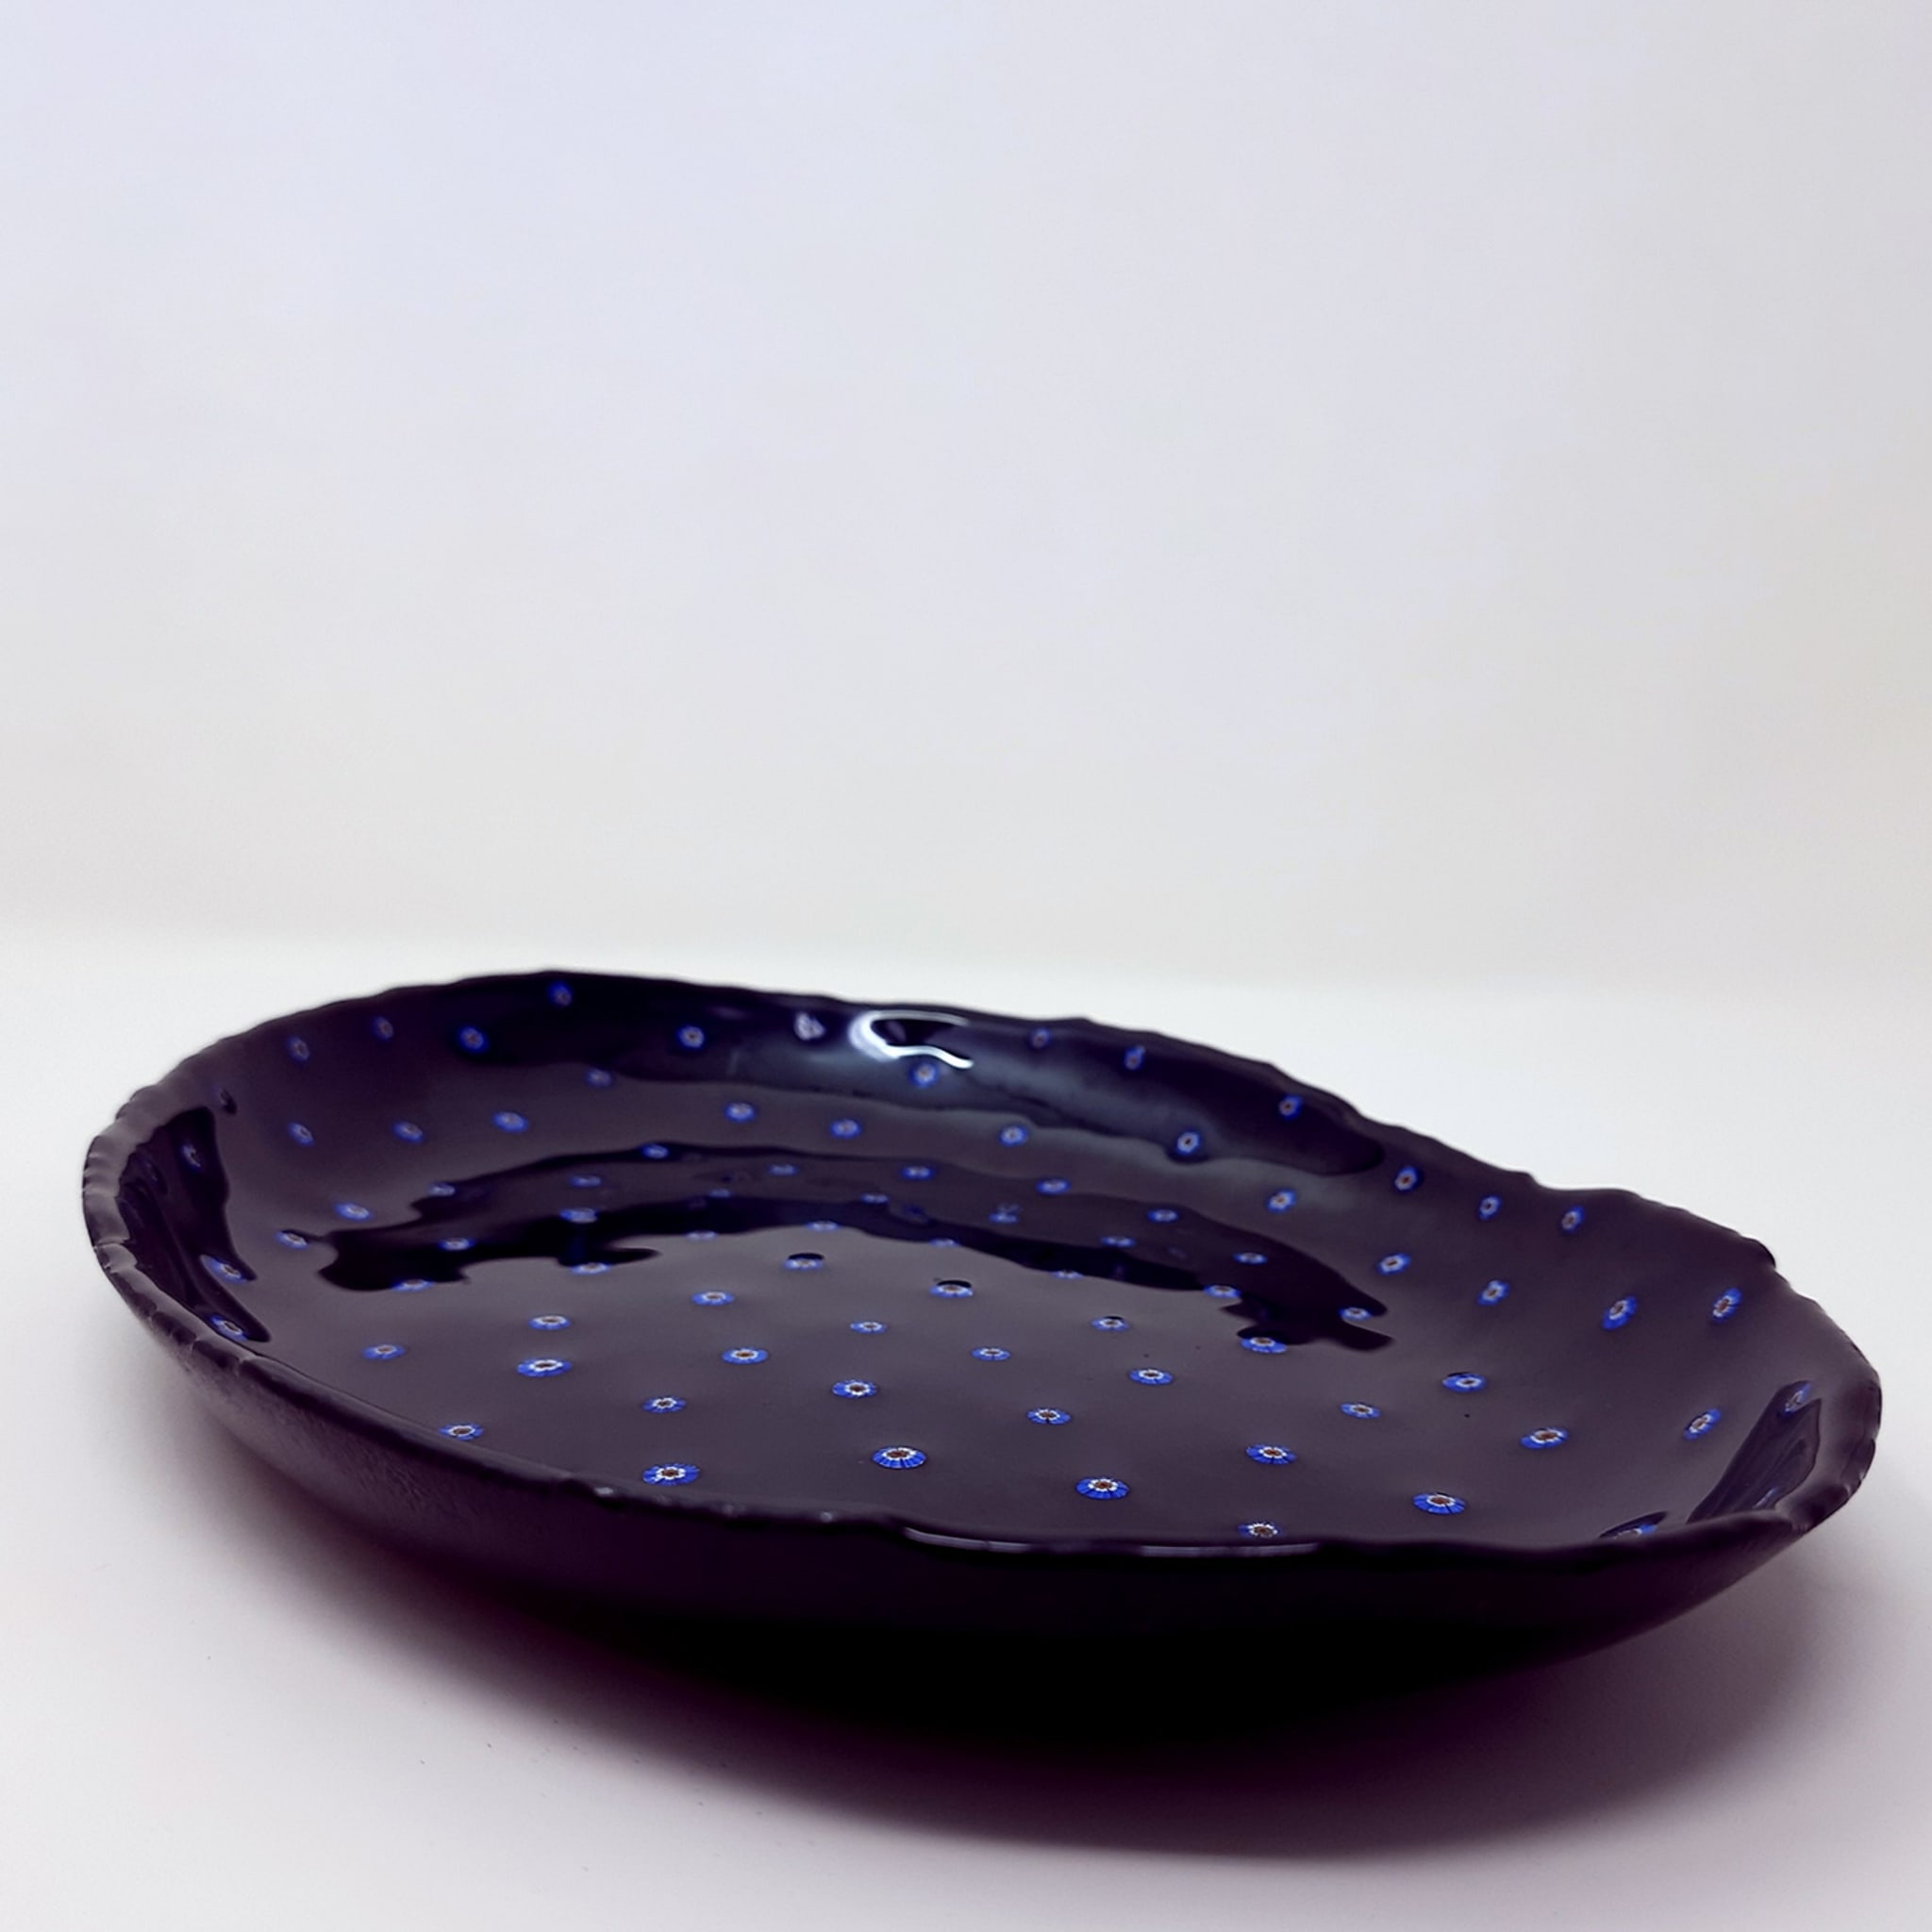 Black Glass Serving Platter with floral murrini inlays - Alternative view 3